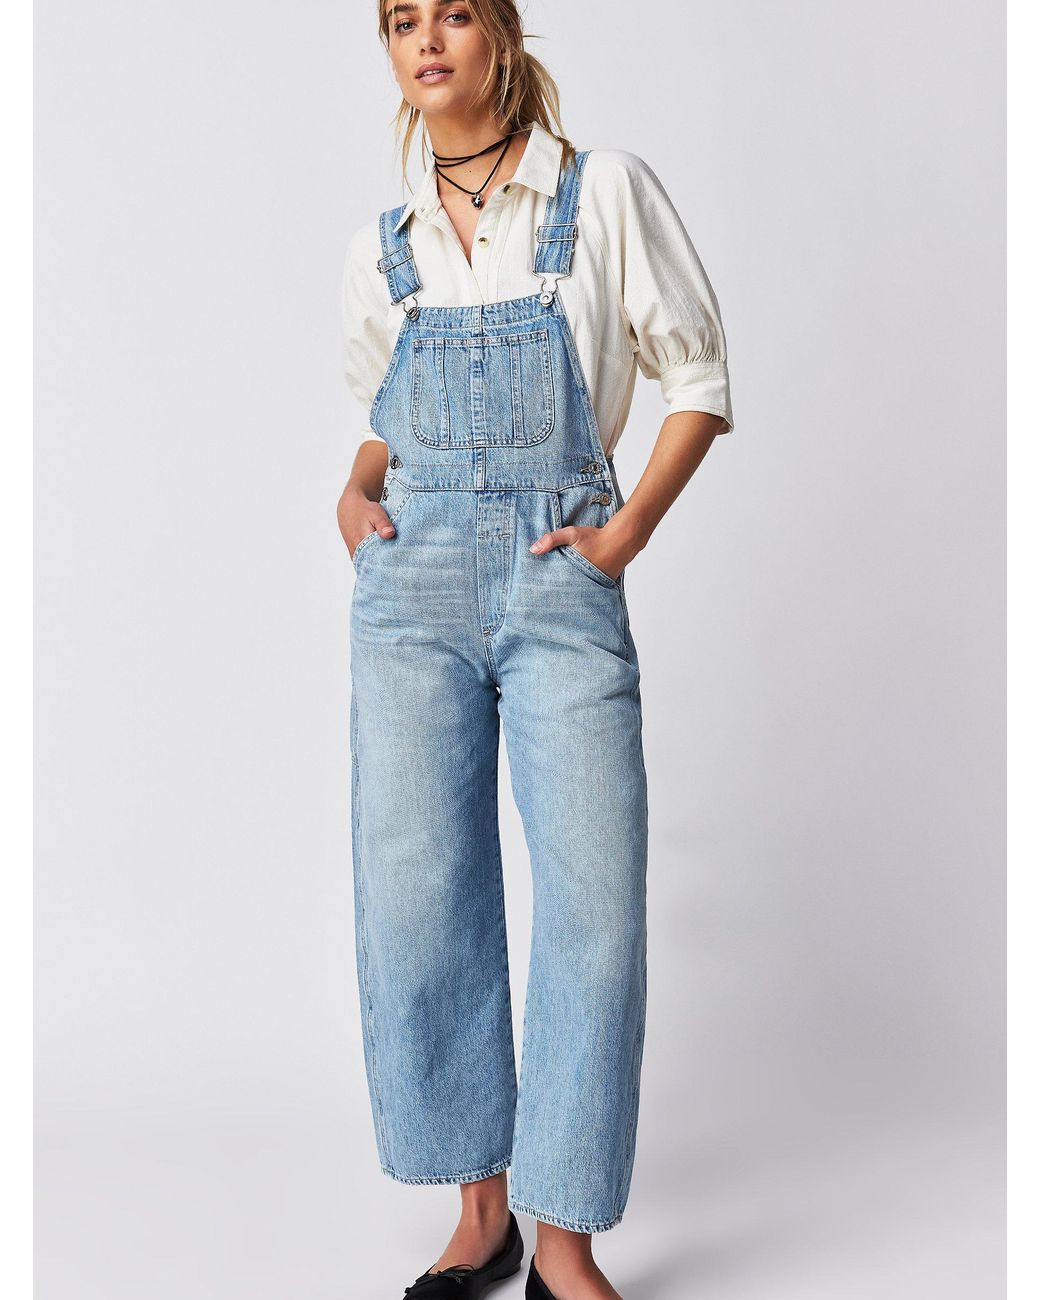 Free People Citizens Of Humanity Jodie Classic Overalls in Blue | Lyst